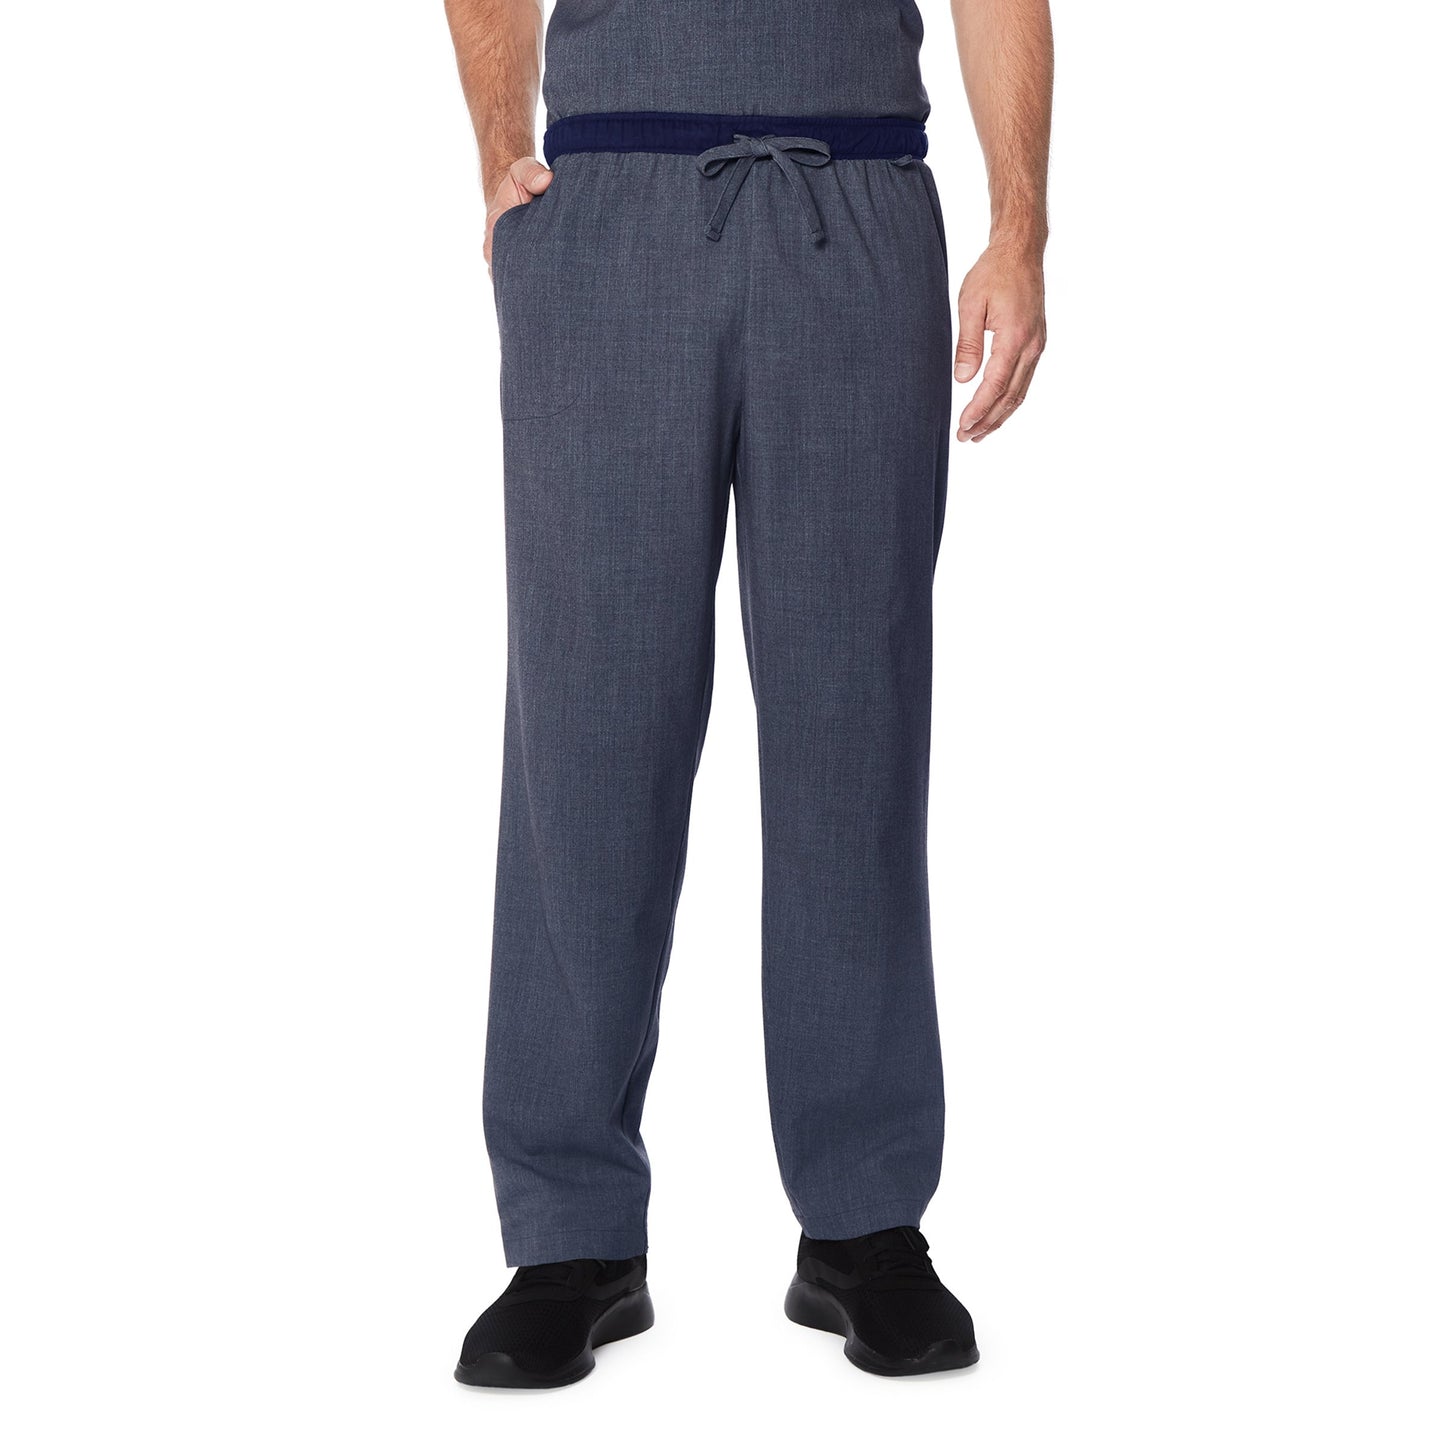 Navy Heather;Model is wearing size M. He is 6'2", Waist 32", Inseam 32".@A man wearing navy heather scrub classic pant.